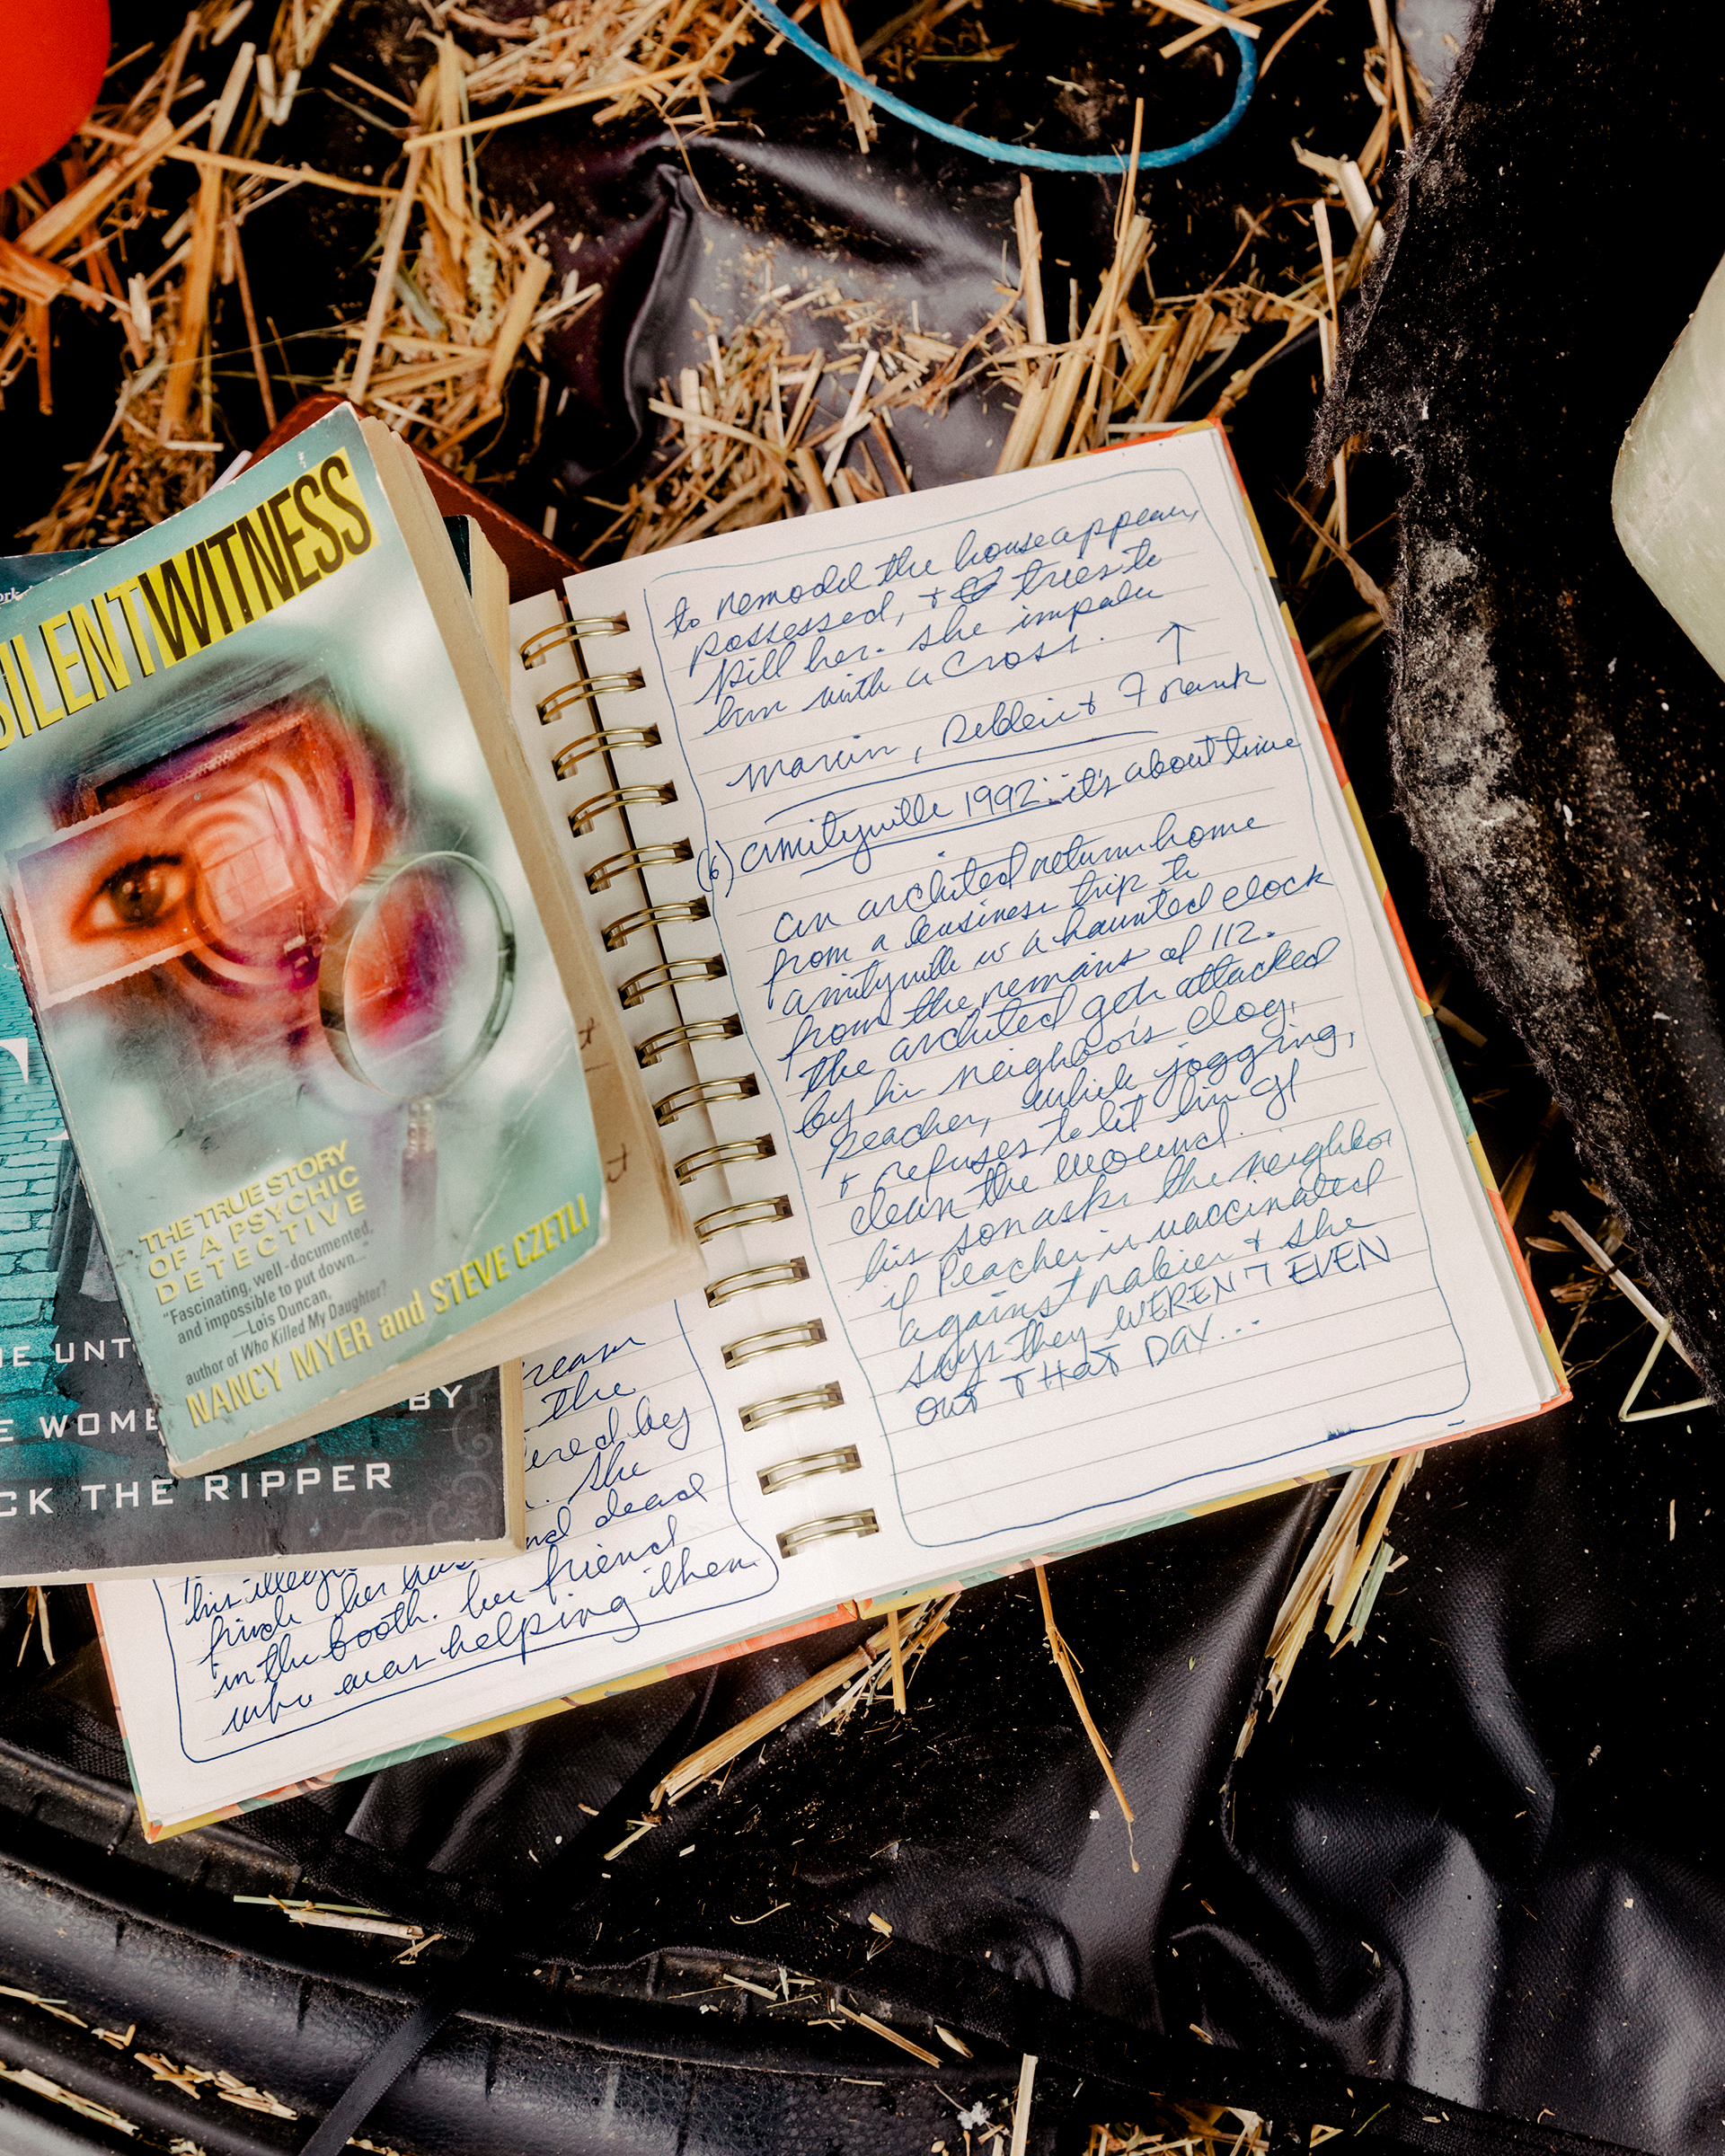 Marquette, Michigan. February 16, 2022. Author and podcaster Sarah Marshall's notebooks and research books are with her wherever she goes. Here they accompany her in her vehicle to Marquette, Michigan where she is currently doing research for a new project.